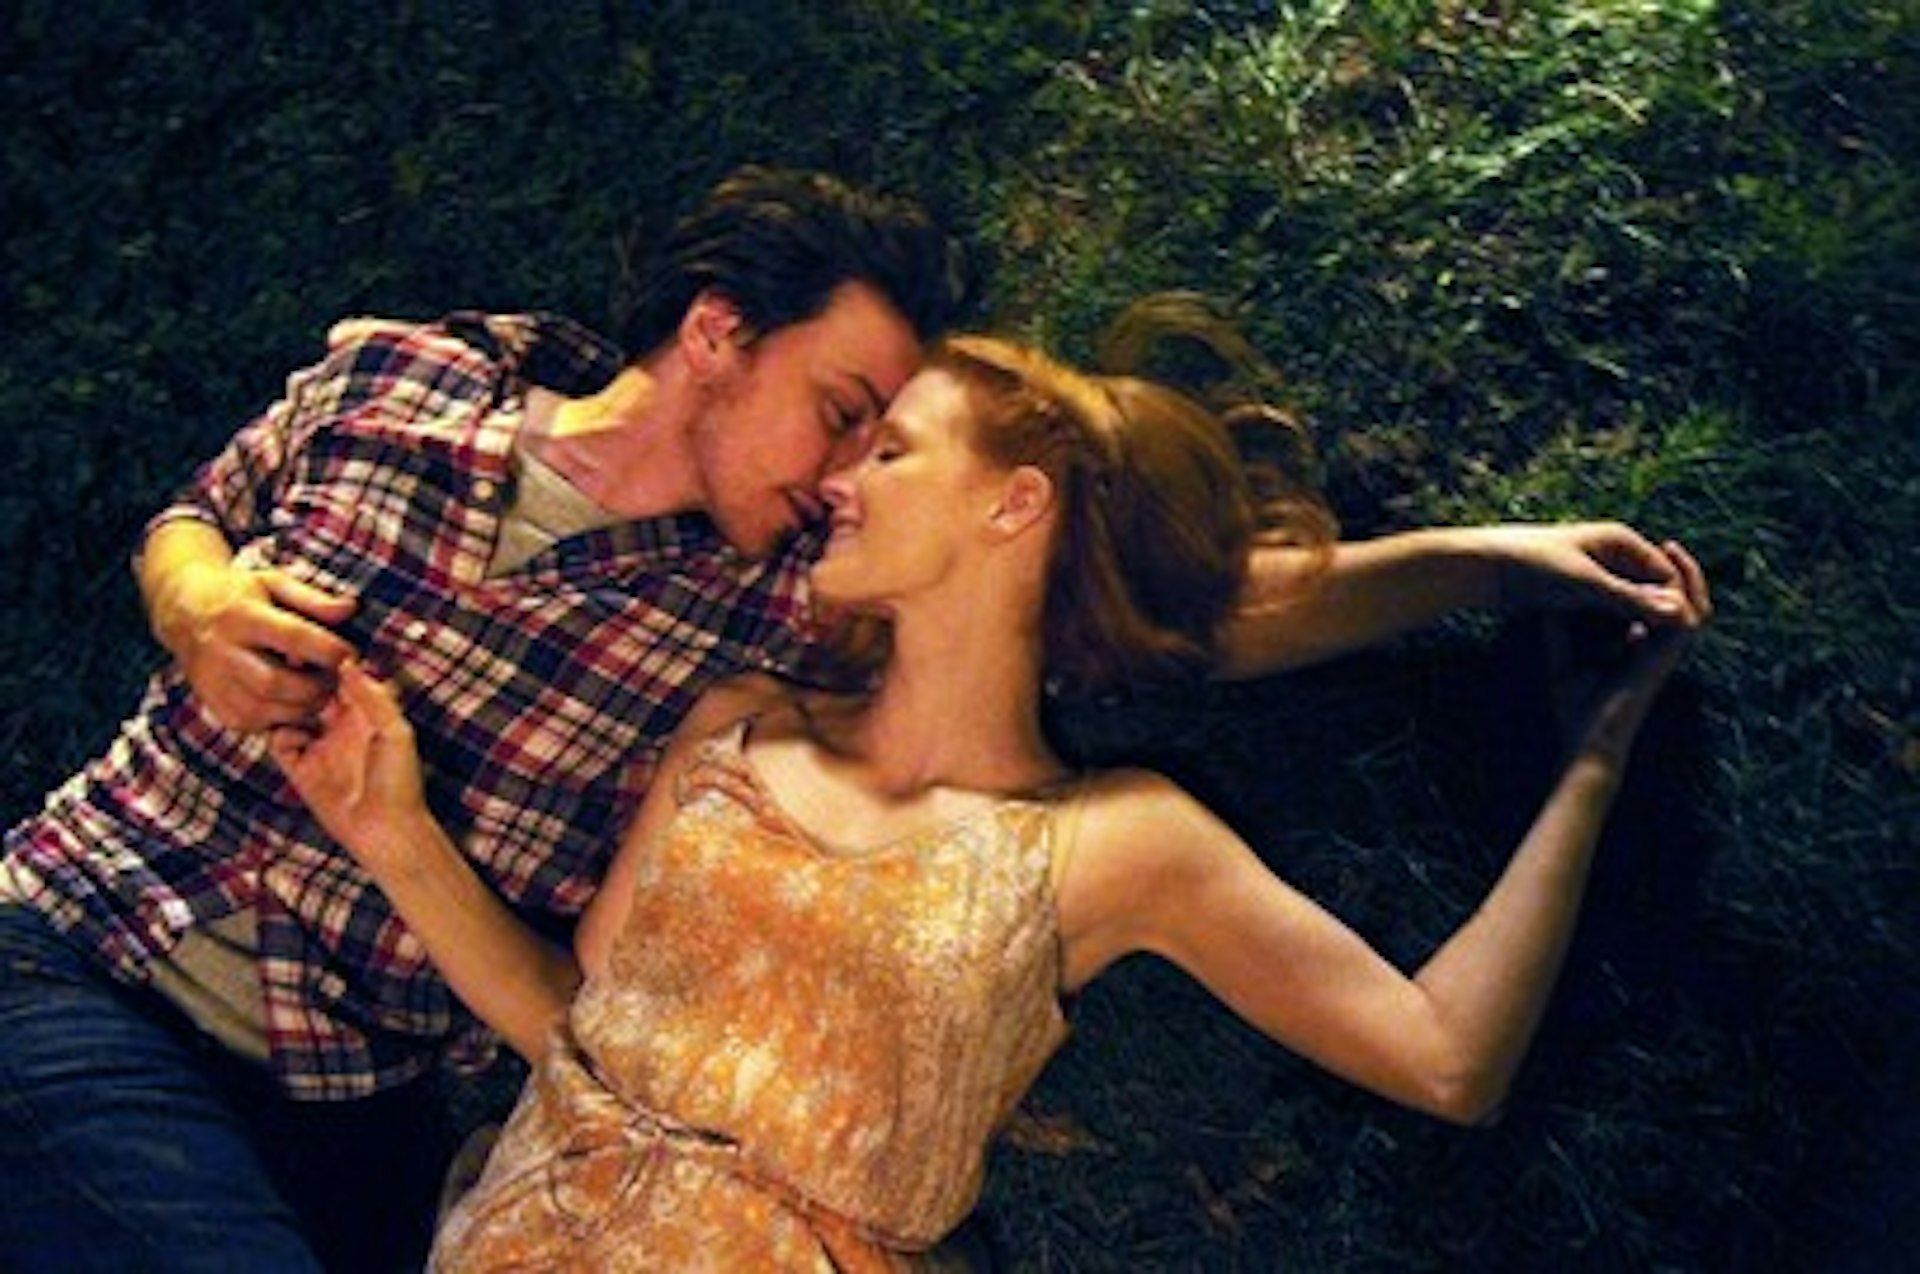 James McAvoy and Jessica Chastain in The Disappearance of Eleanor Rigby